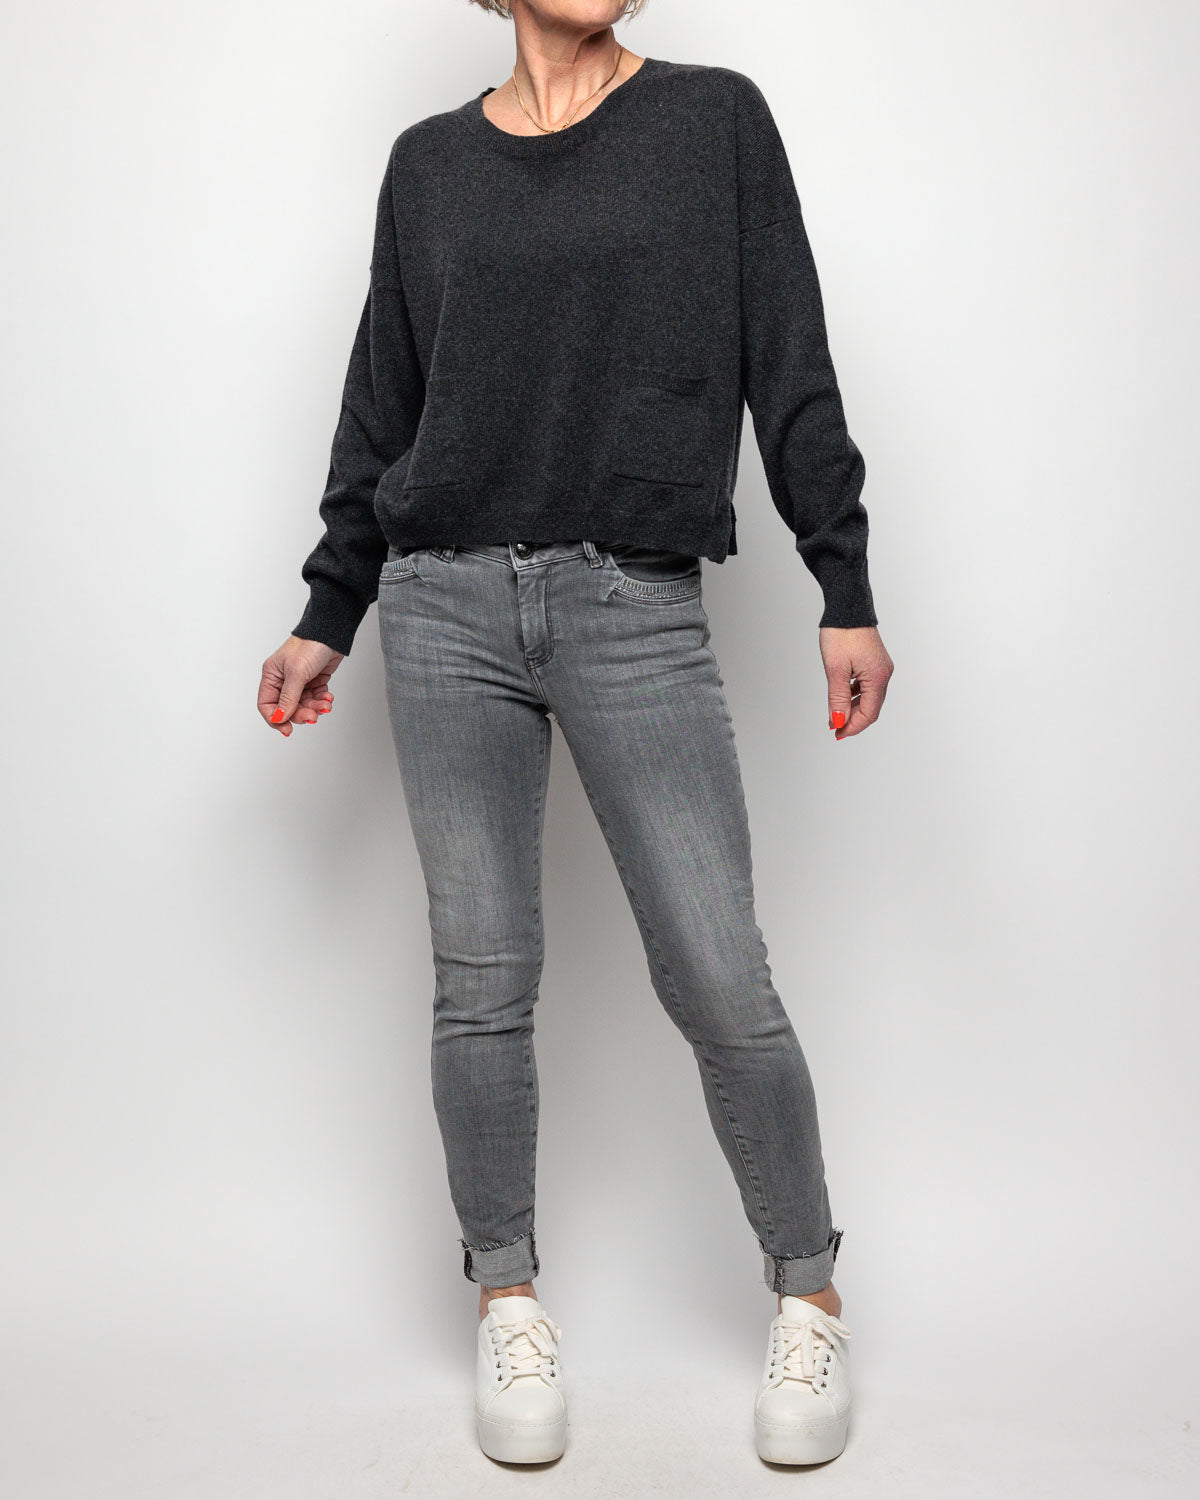 Caroline Cashmere Twin Pocket Sweater in Charcoal